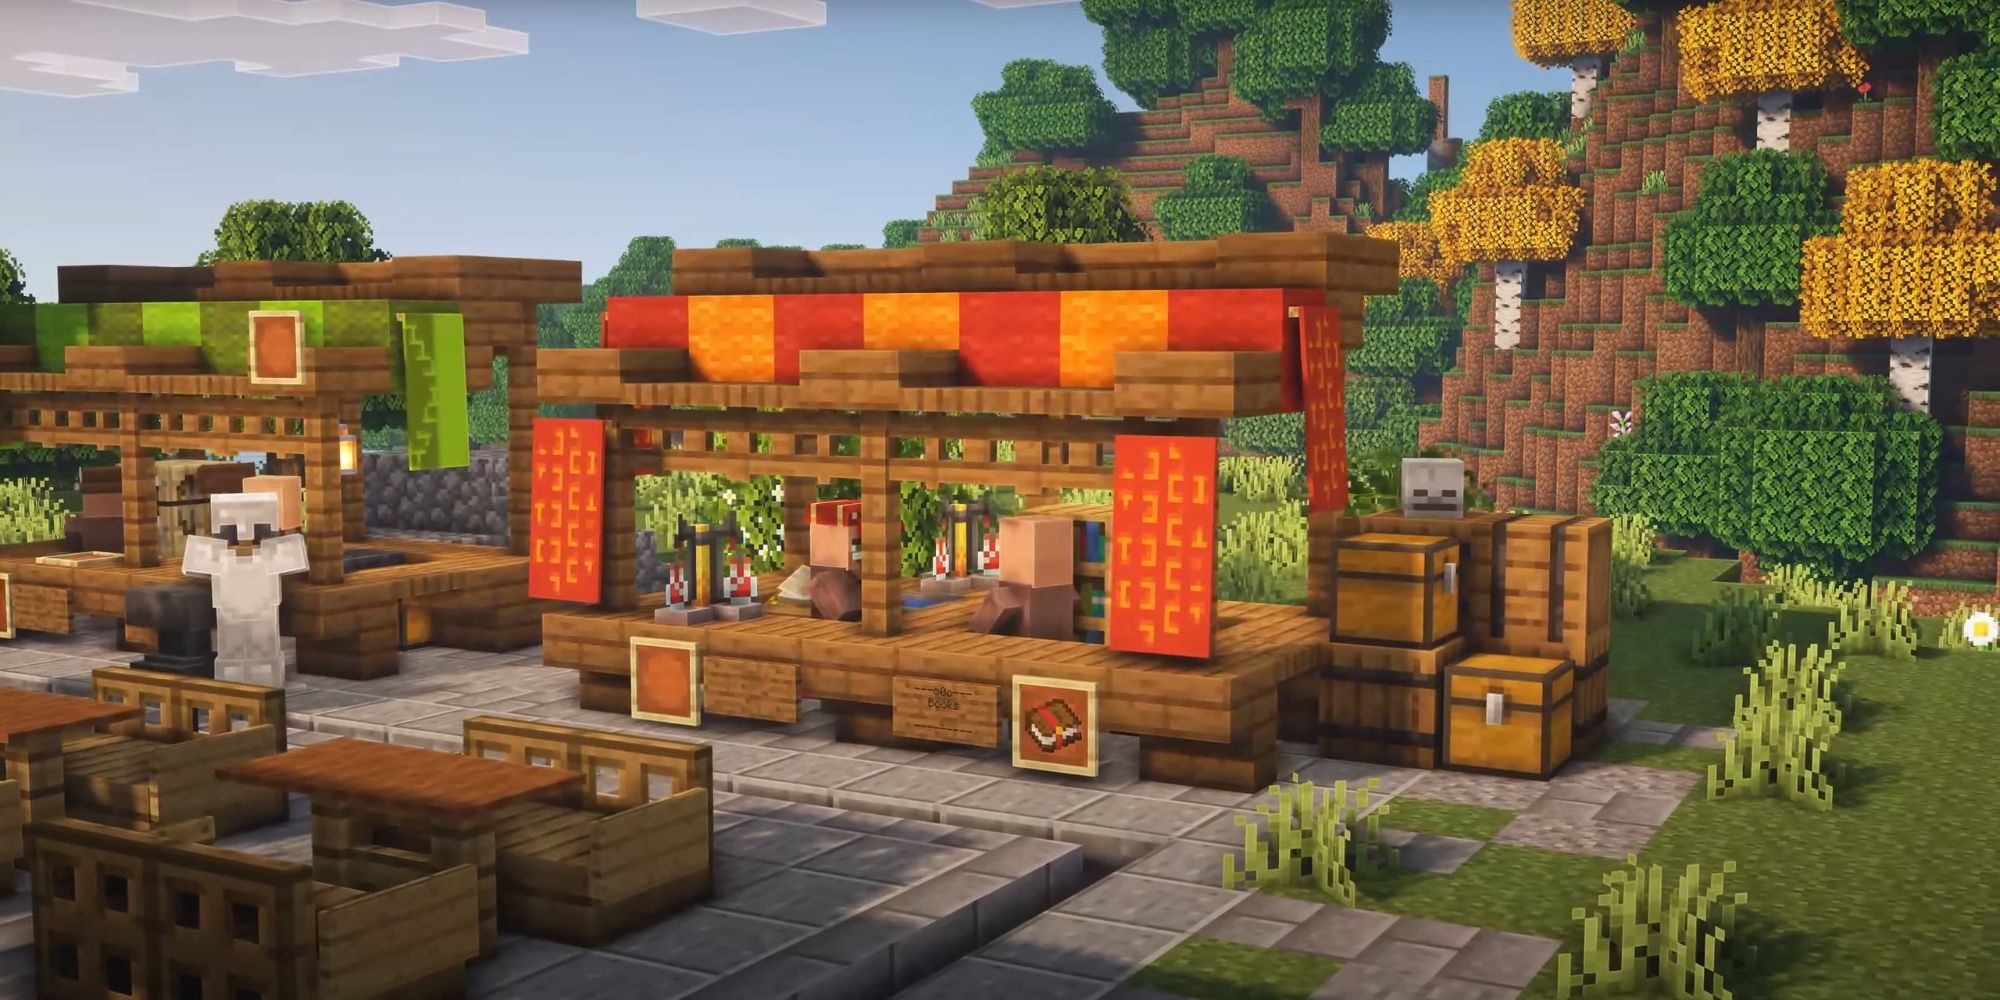 An image from Minecraft Villager of villagers talking with each other in Trading Stalls. This build allows you to make a marketplace that can be used to earn materials or emeralds.